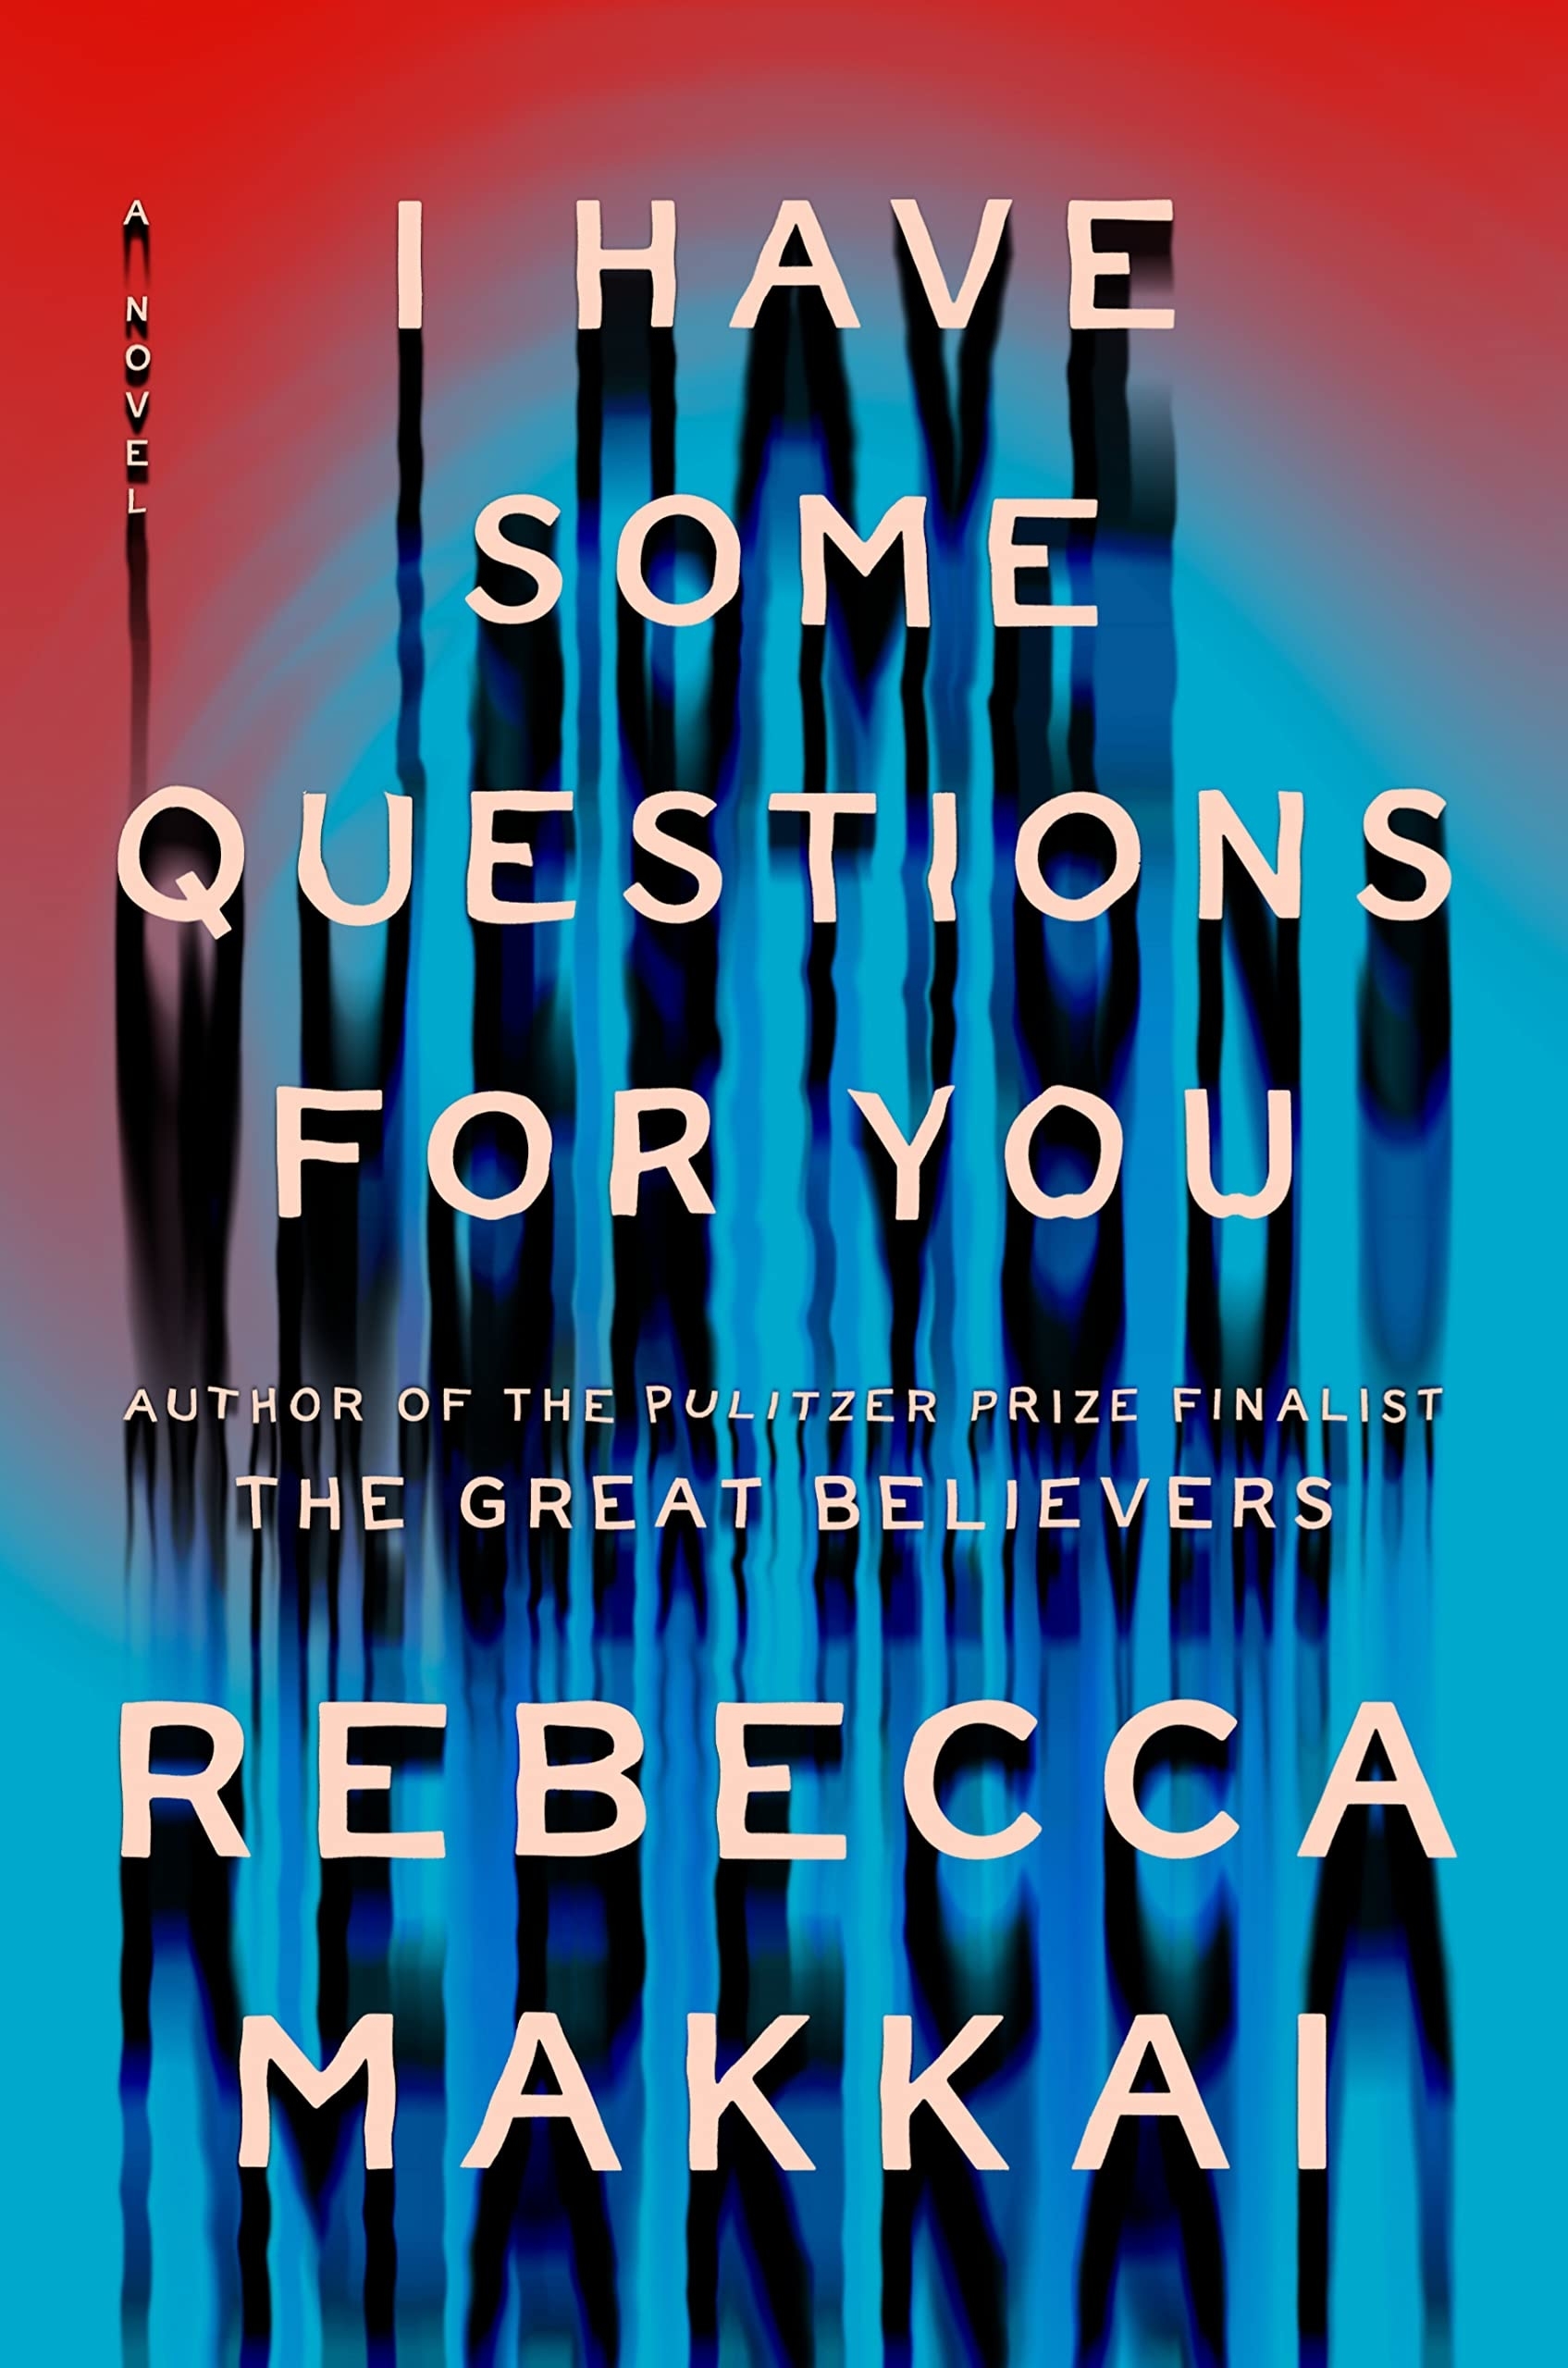 &quot;I Have Some Questions for You&quot; by Rebecca Makkai